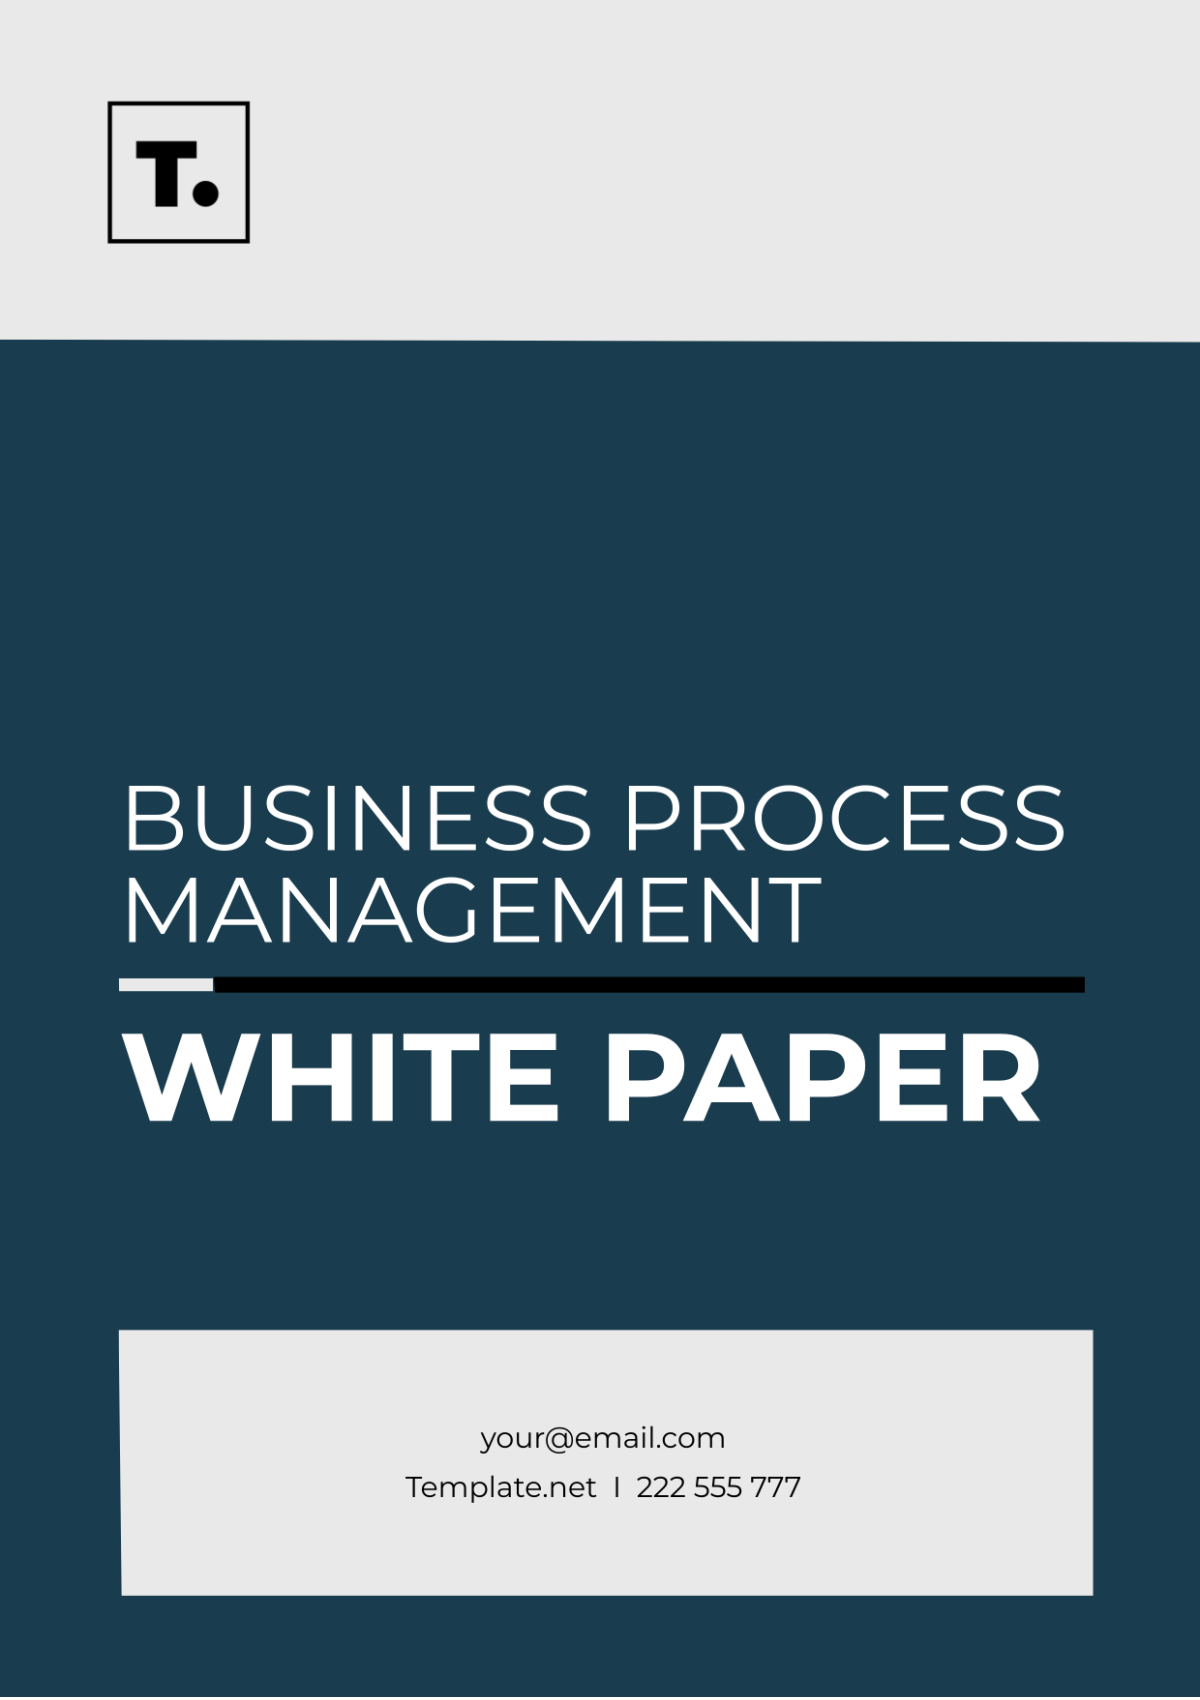 Business Process Management White Paper Template